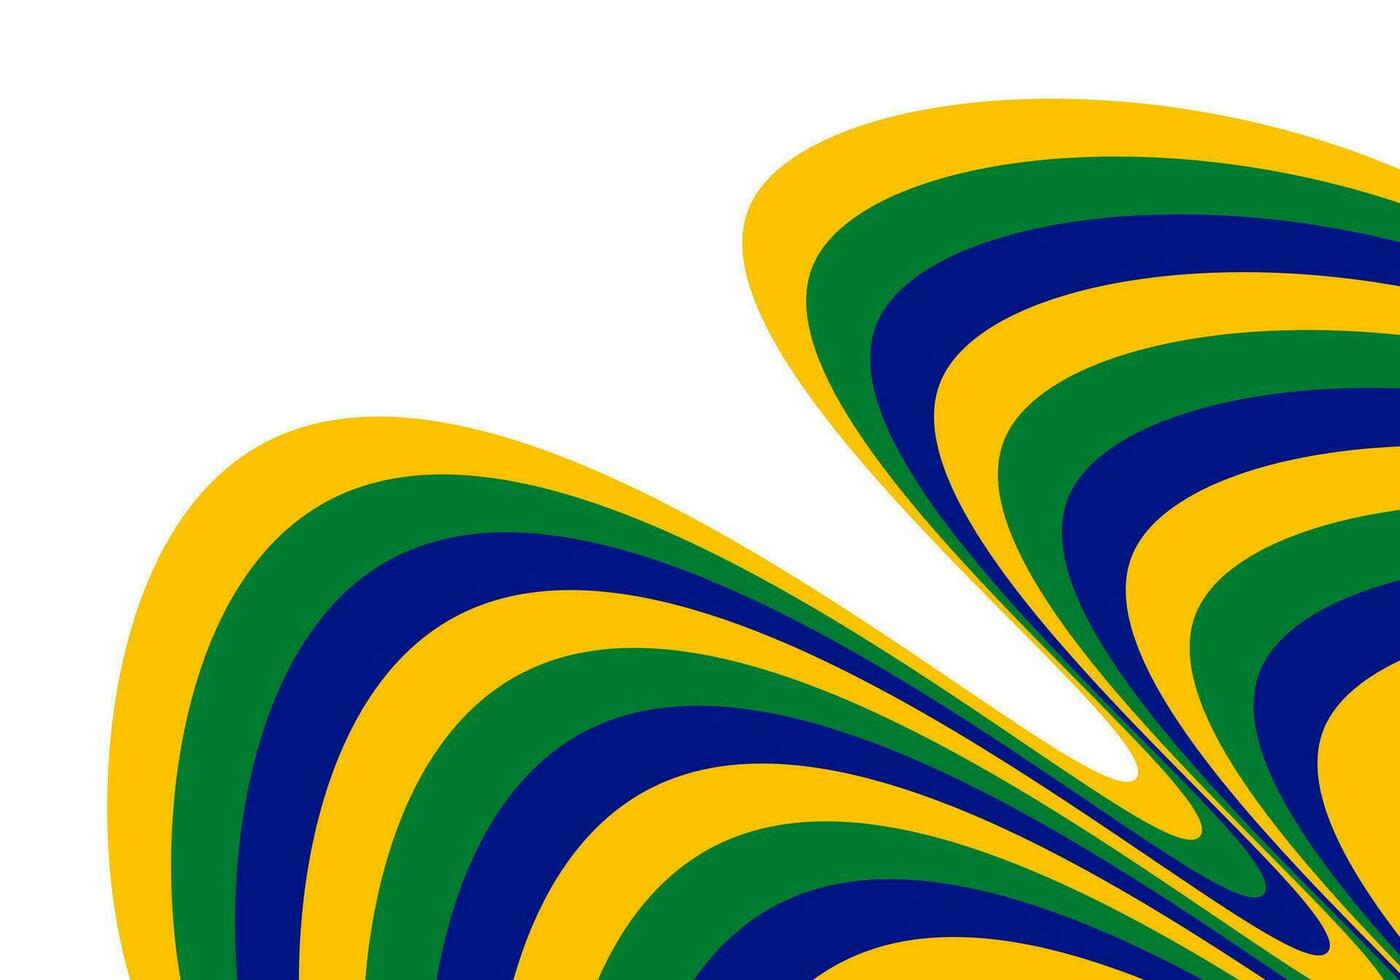 Abstract wavy pattern background brazil colors. Vector illustration